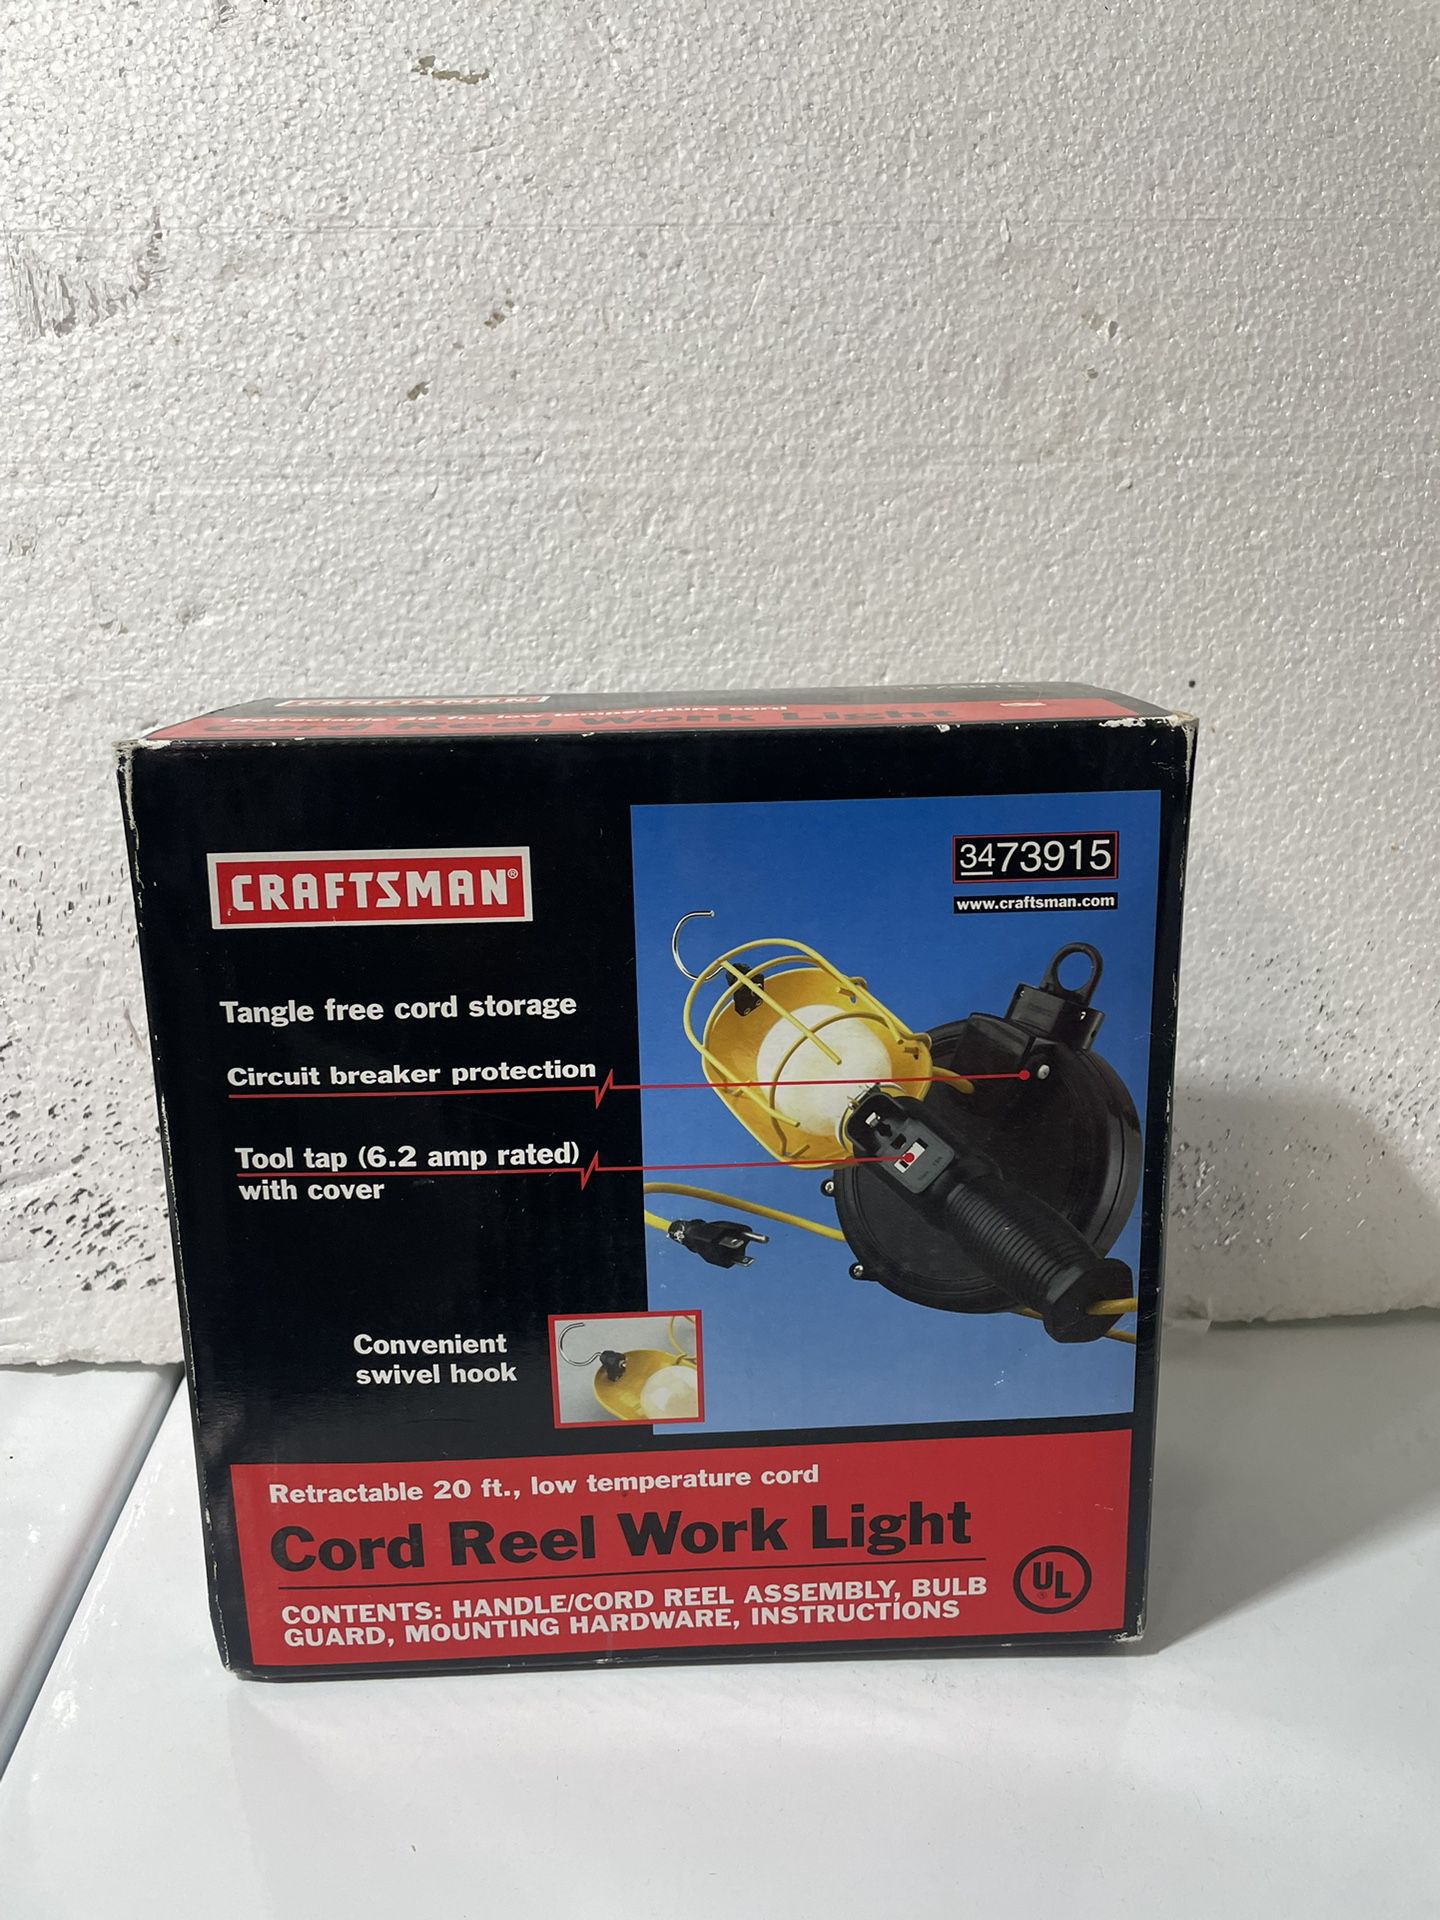 Craftsman 20 ft Cord Reel Work Light for Sale in Livermore, CA